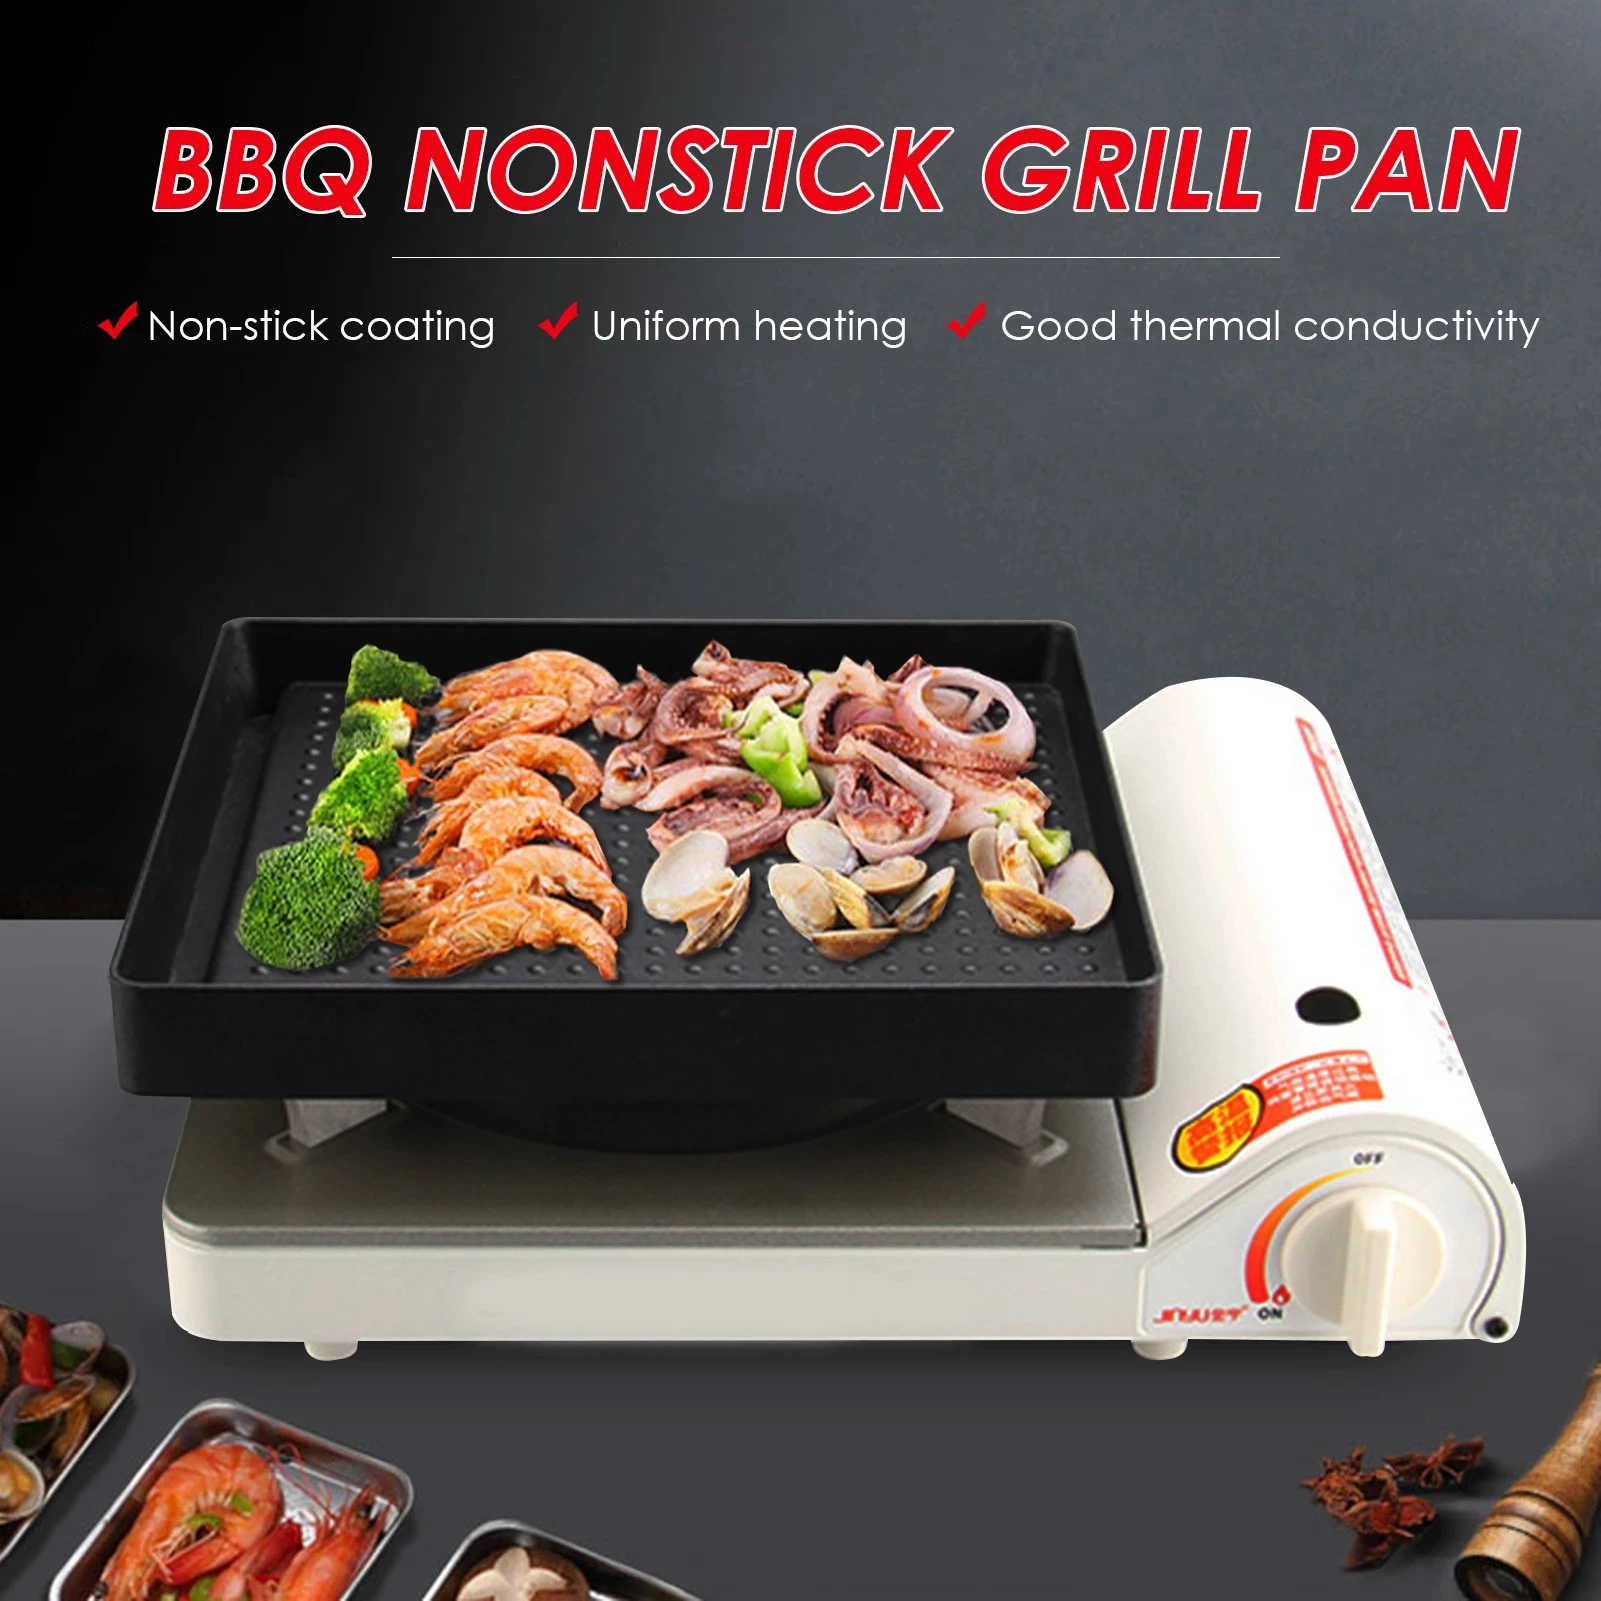 

22*25cm Portable BBQ Grill Pan Non-Stick Charcoal Grill Plate Butane Gas Stove Cooker Party Picnic Terrace Beach Barbecue Tray